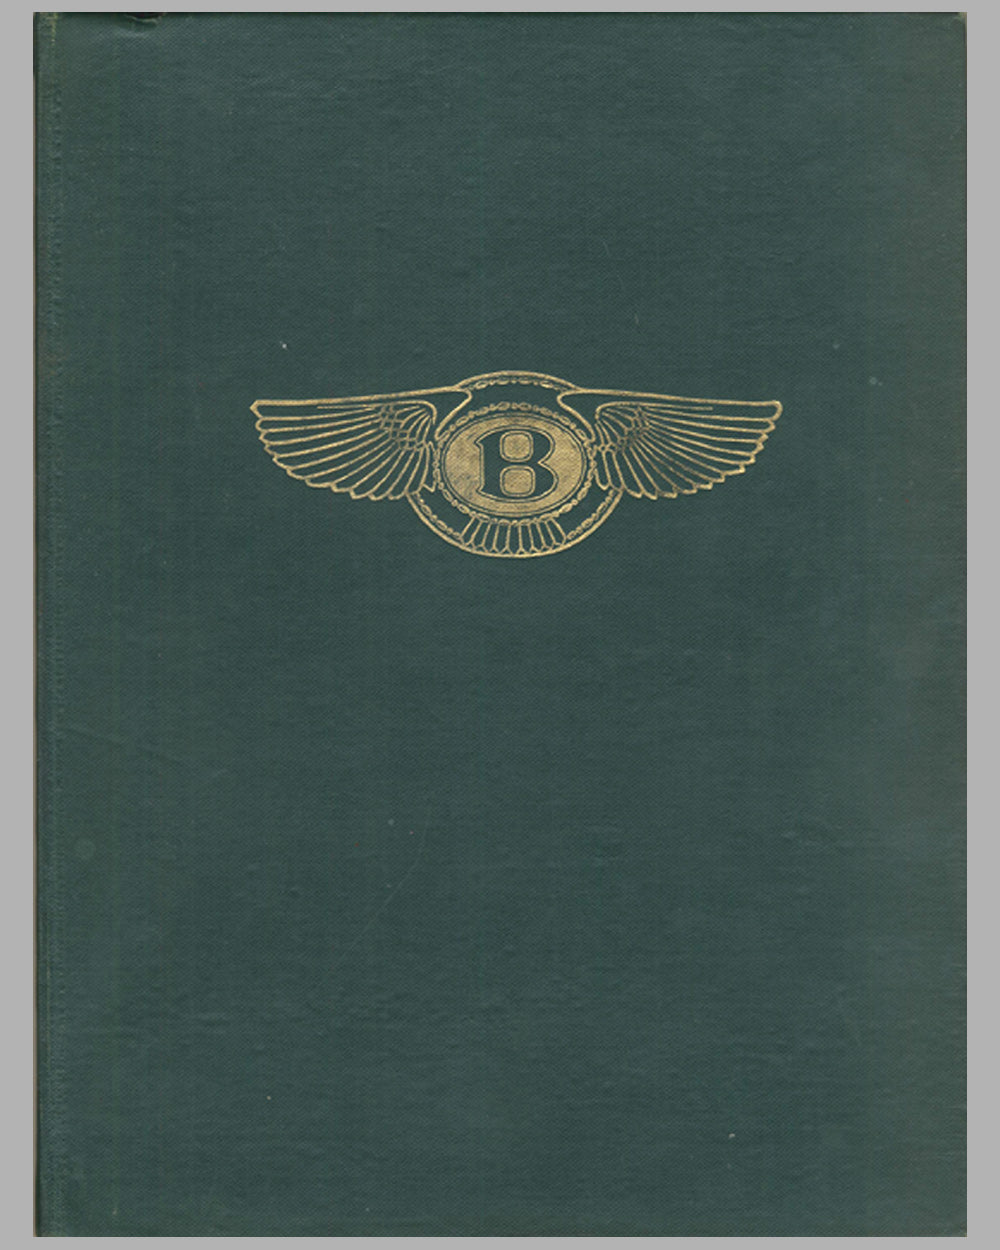 A Racing History of the Bentley 1921-1931 book by Darell Berthon, 1st ed., 1956